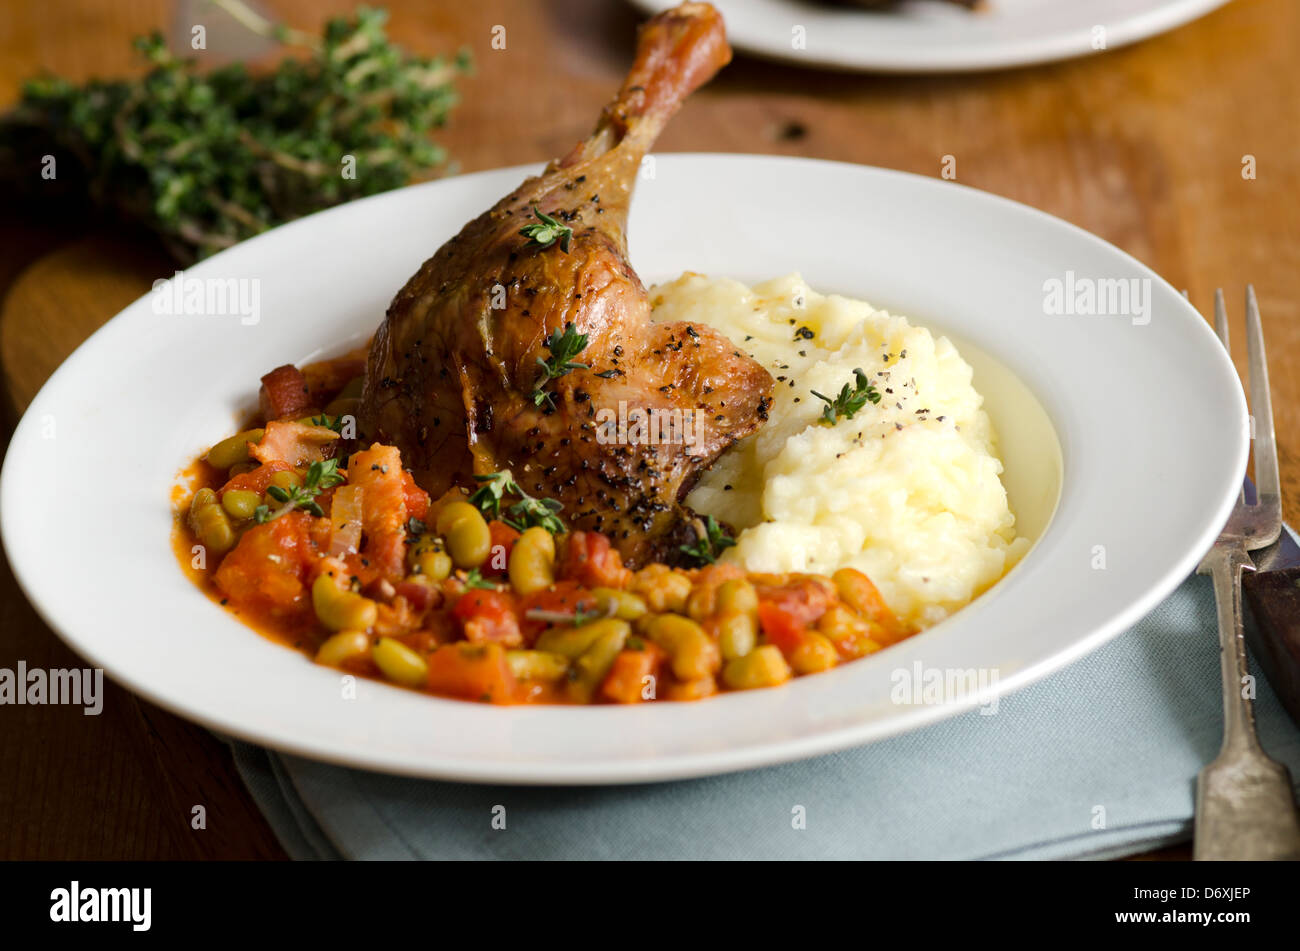 Confit duck leg with beans and mash Stock Photo